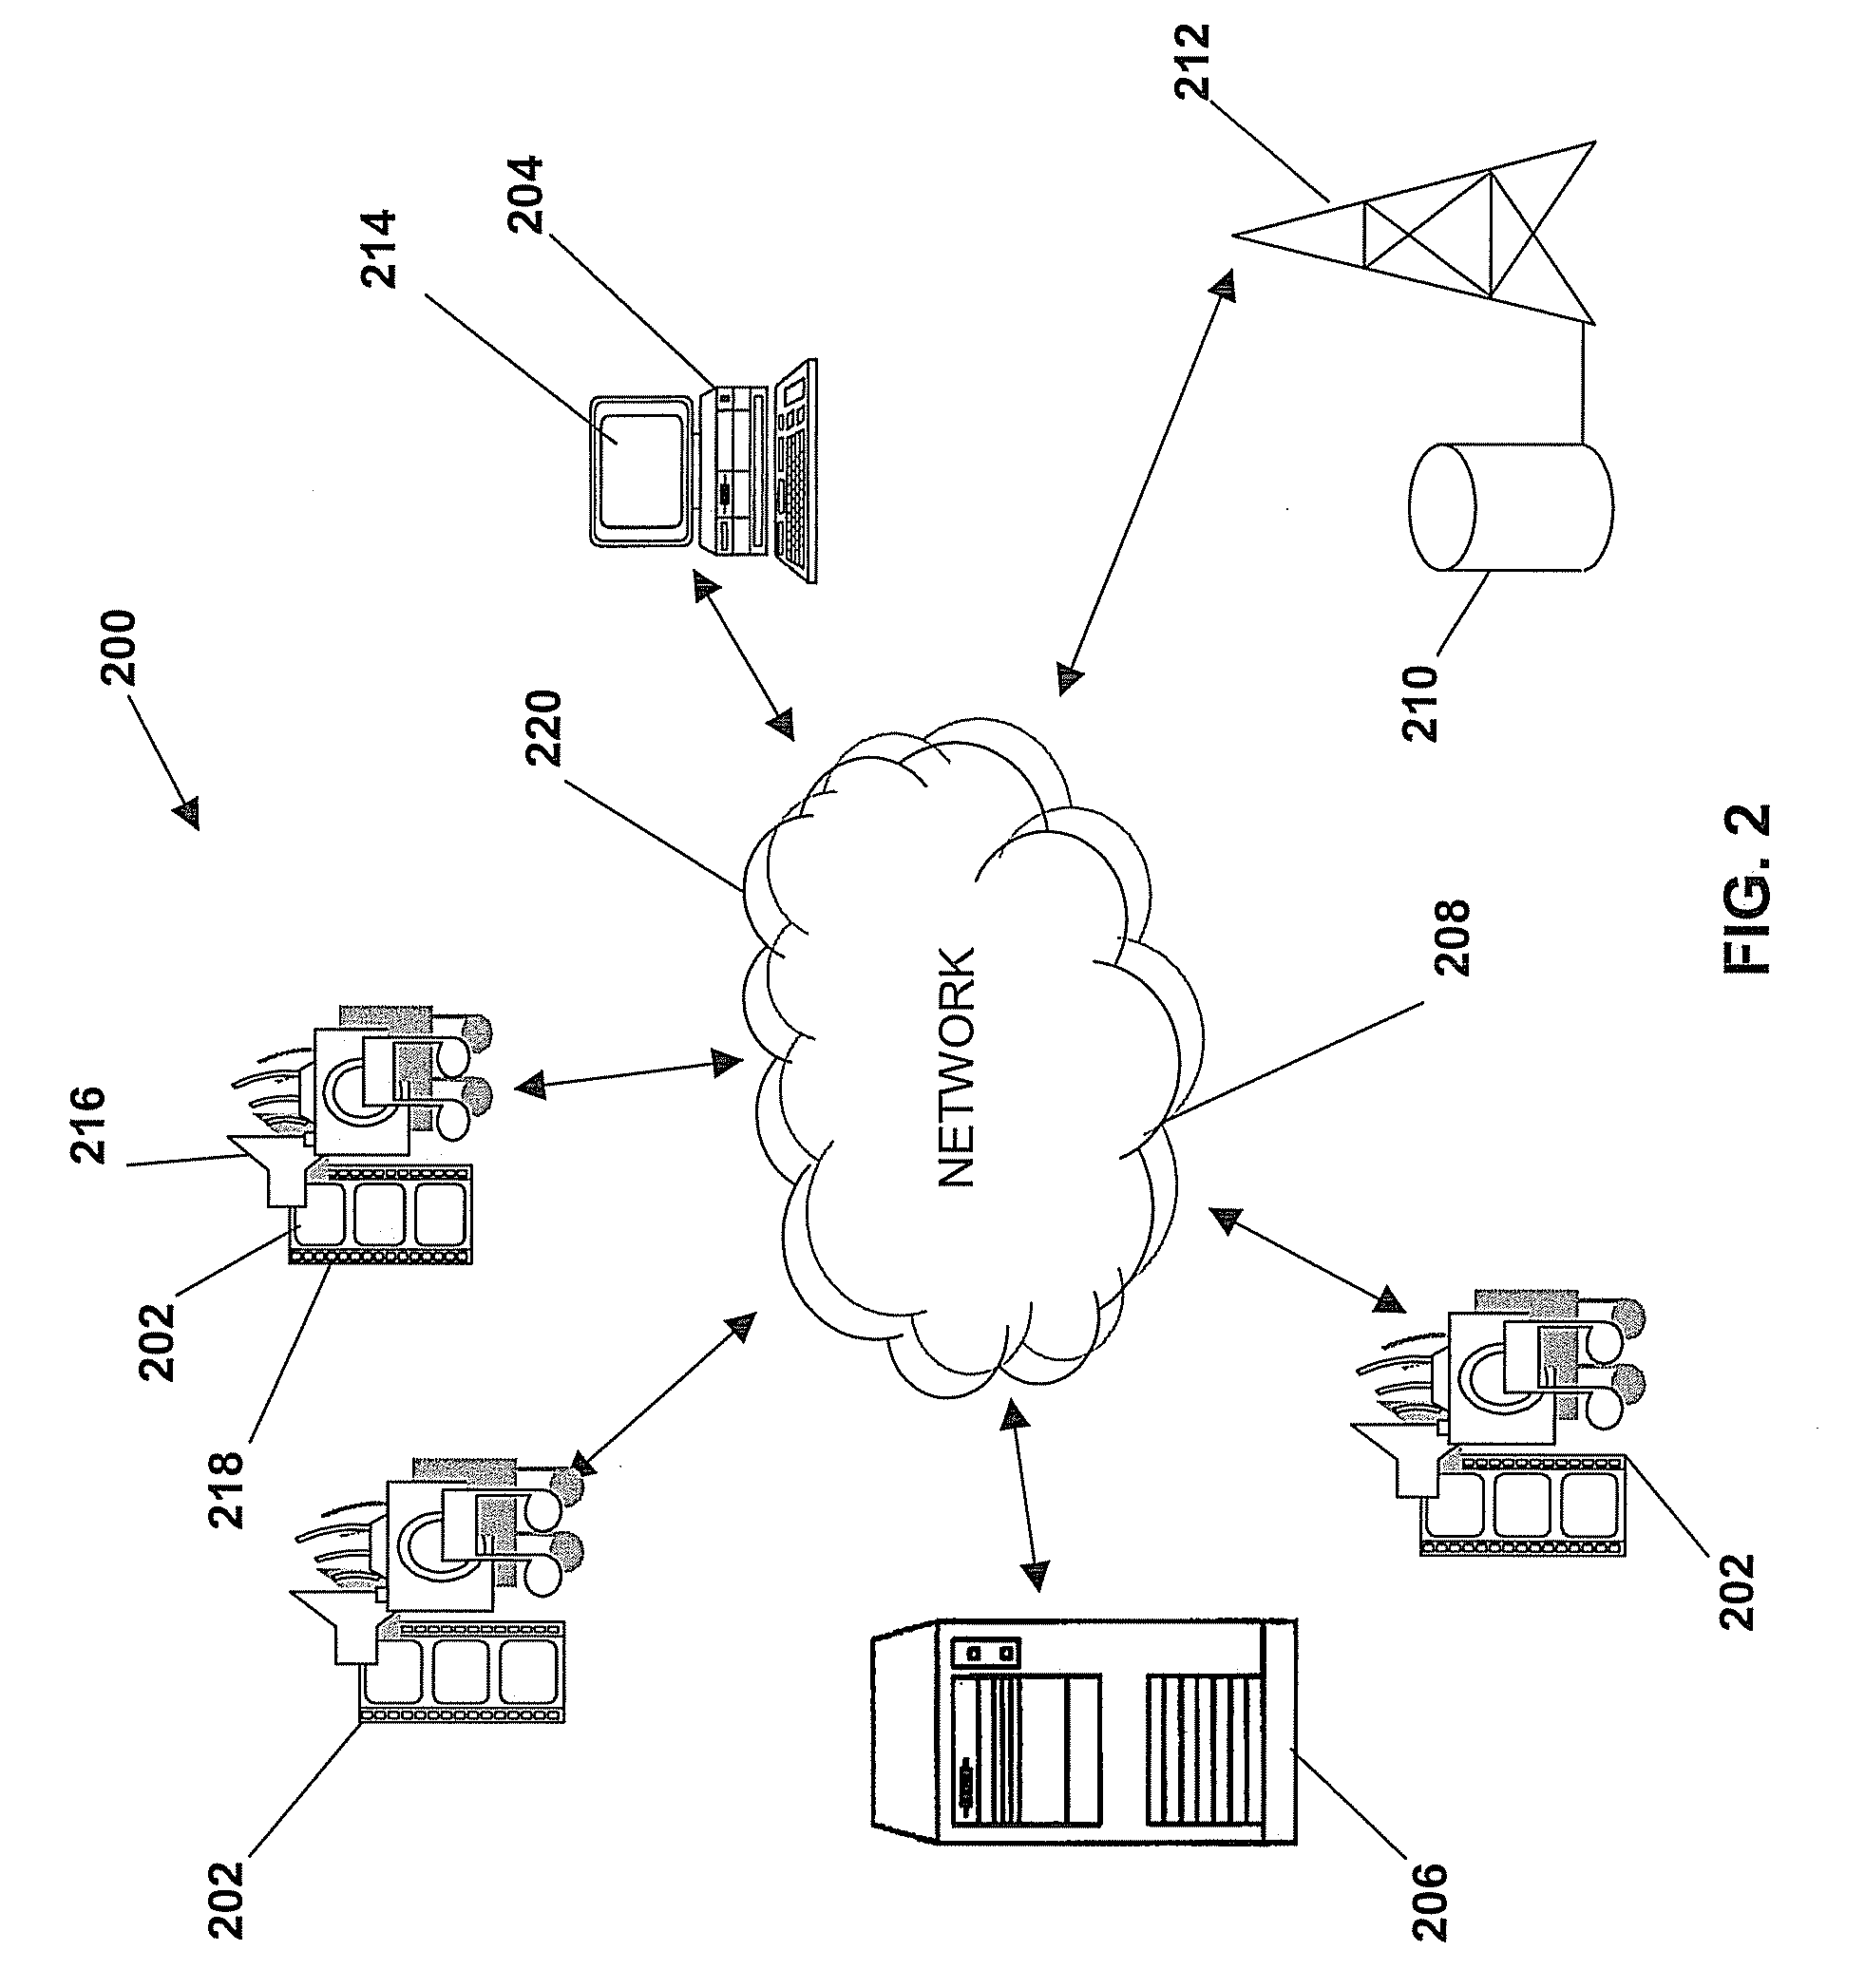 Method for utilization of active power profiles used in prediction of power reserves for remote devices